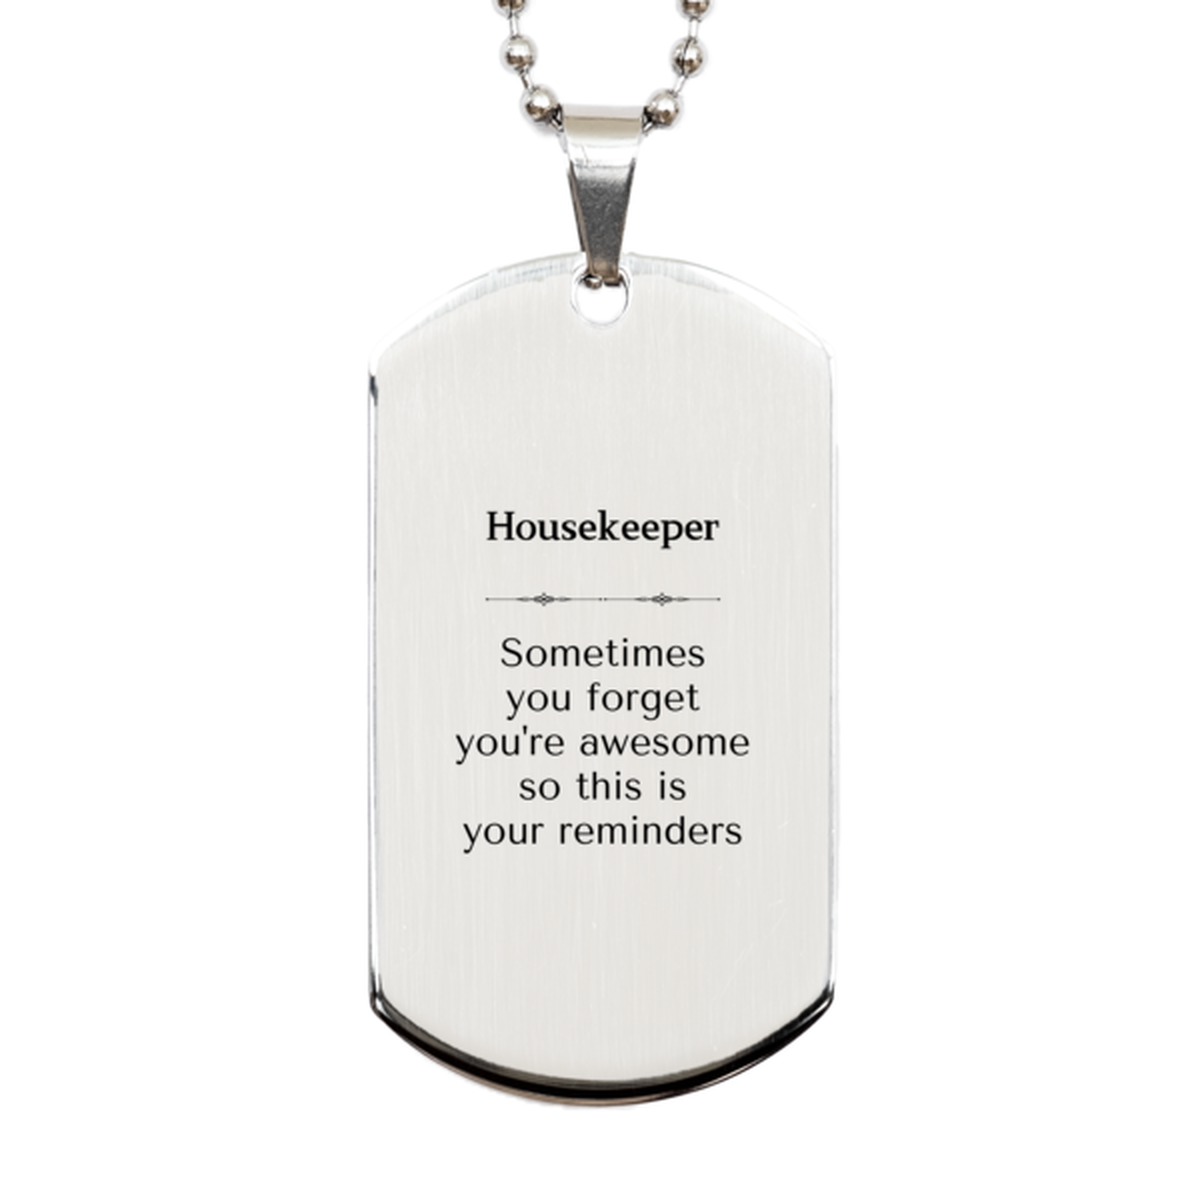 Sentimental Housekeeper Silver Dog Tag, Housekeeper Sometimes you forget you're awesome so this is your reminders, Graduation Christmas Birthday Gifts for Housekeeper, Men, Women, Coworkers